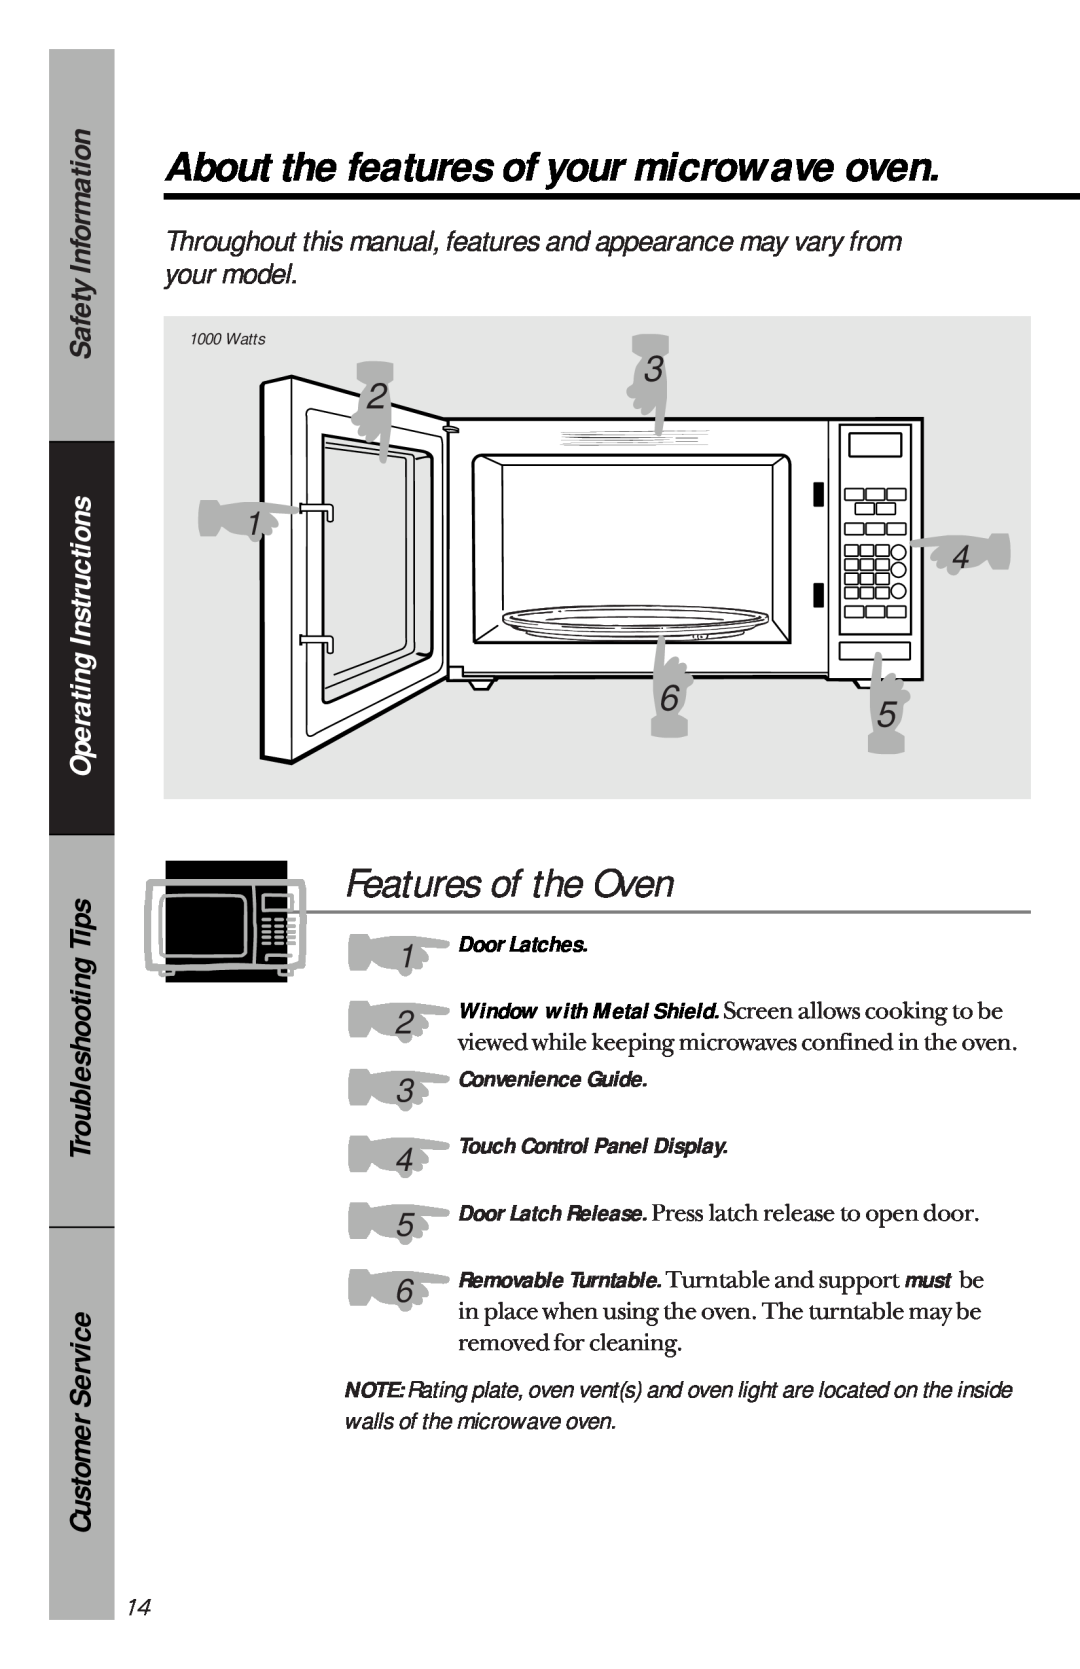 GE je1540 Features of the Oven, Safety Information, Instructions, About the features of your microwave oven, Operating 